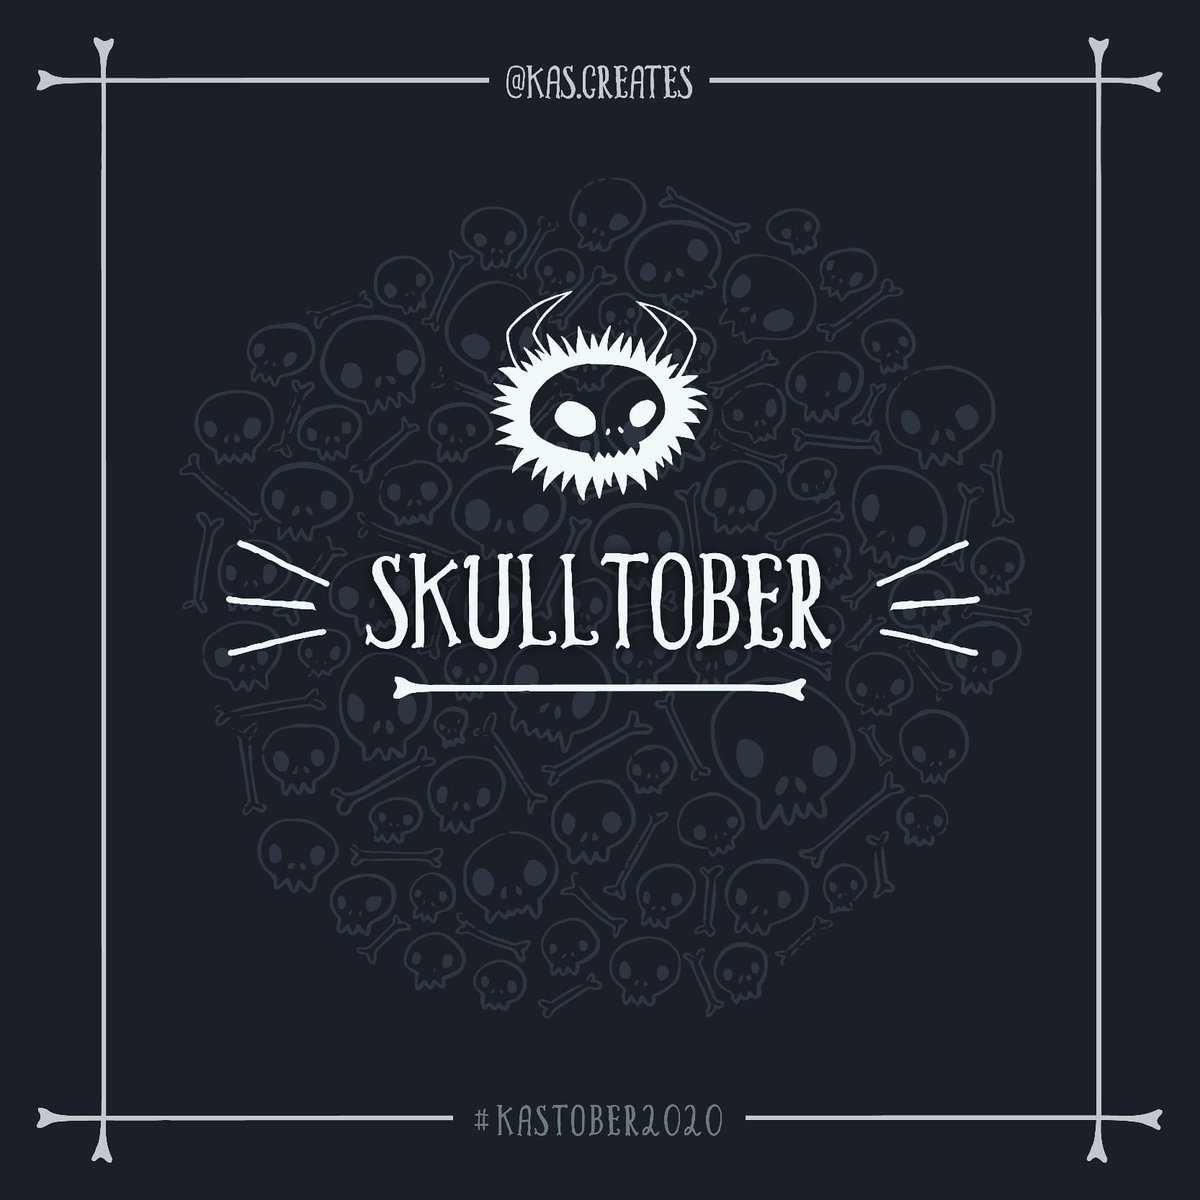 I am wildly unprepared for  #inktober2020  but I need to start stretching my drawing muscles again so I will be participating, even if it kills me  With that in mind I have decided that my theme for the month is going to be SKULLS!!  #kascreates  #skulltober  #kastober2020